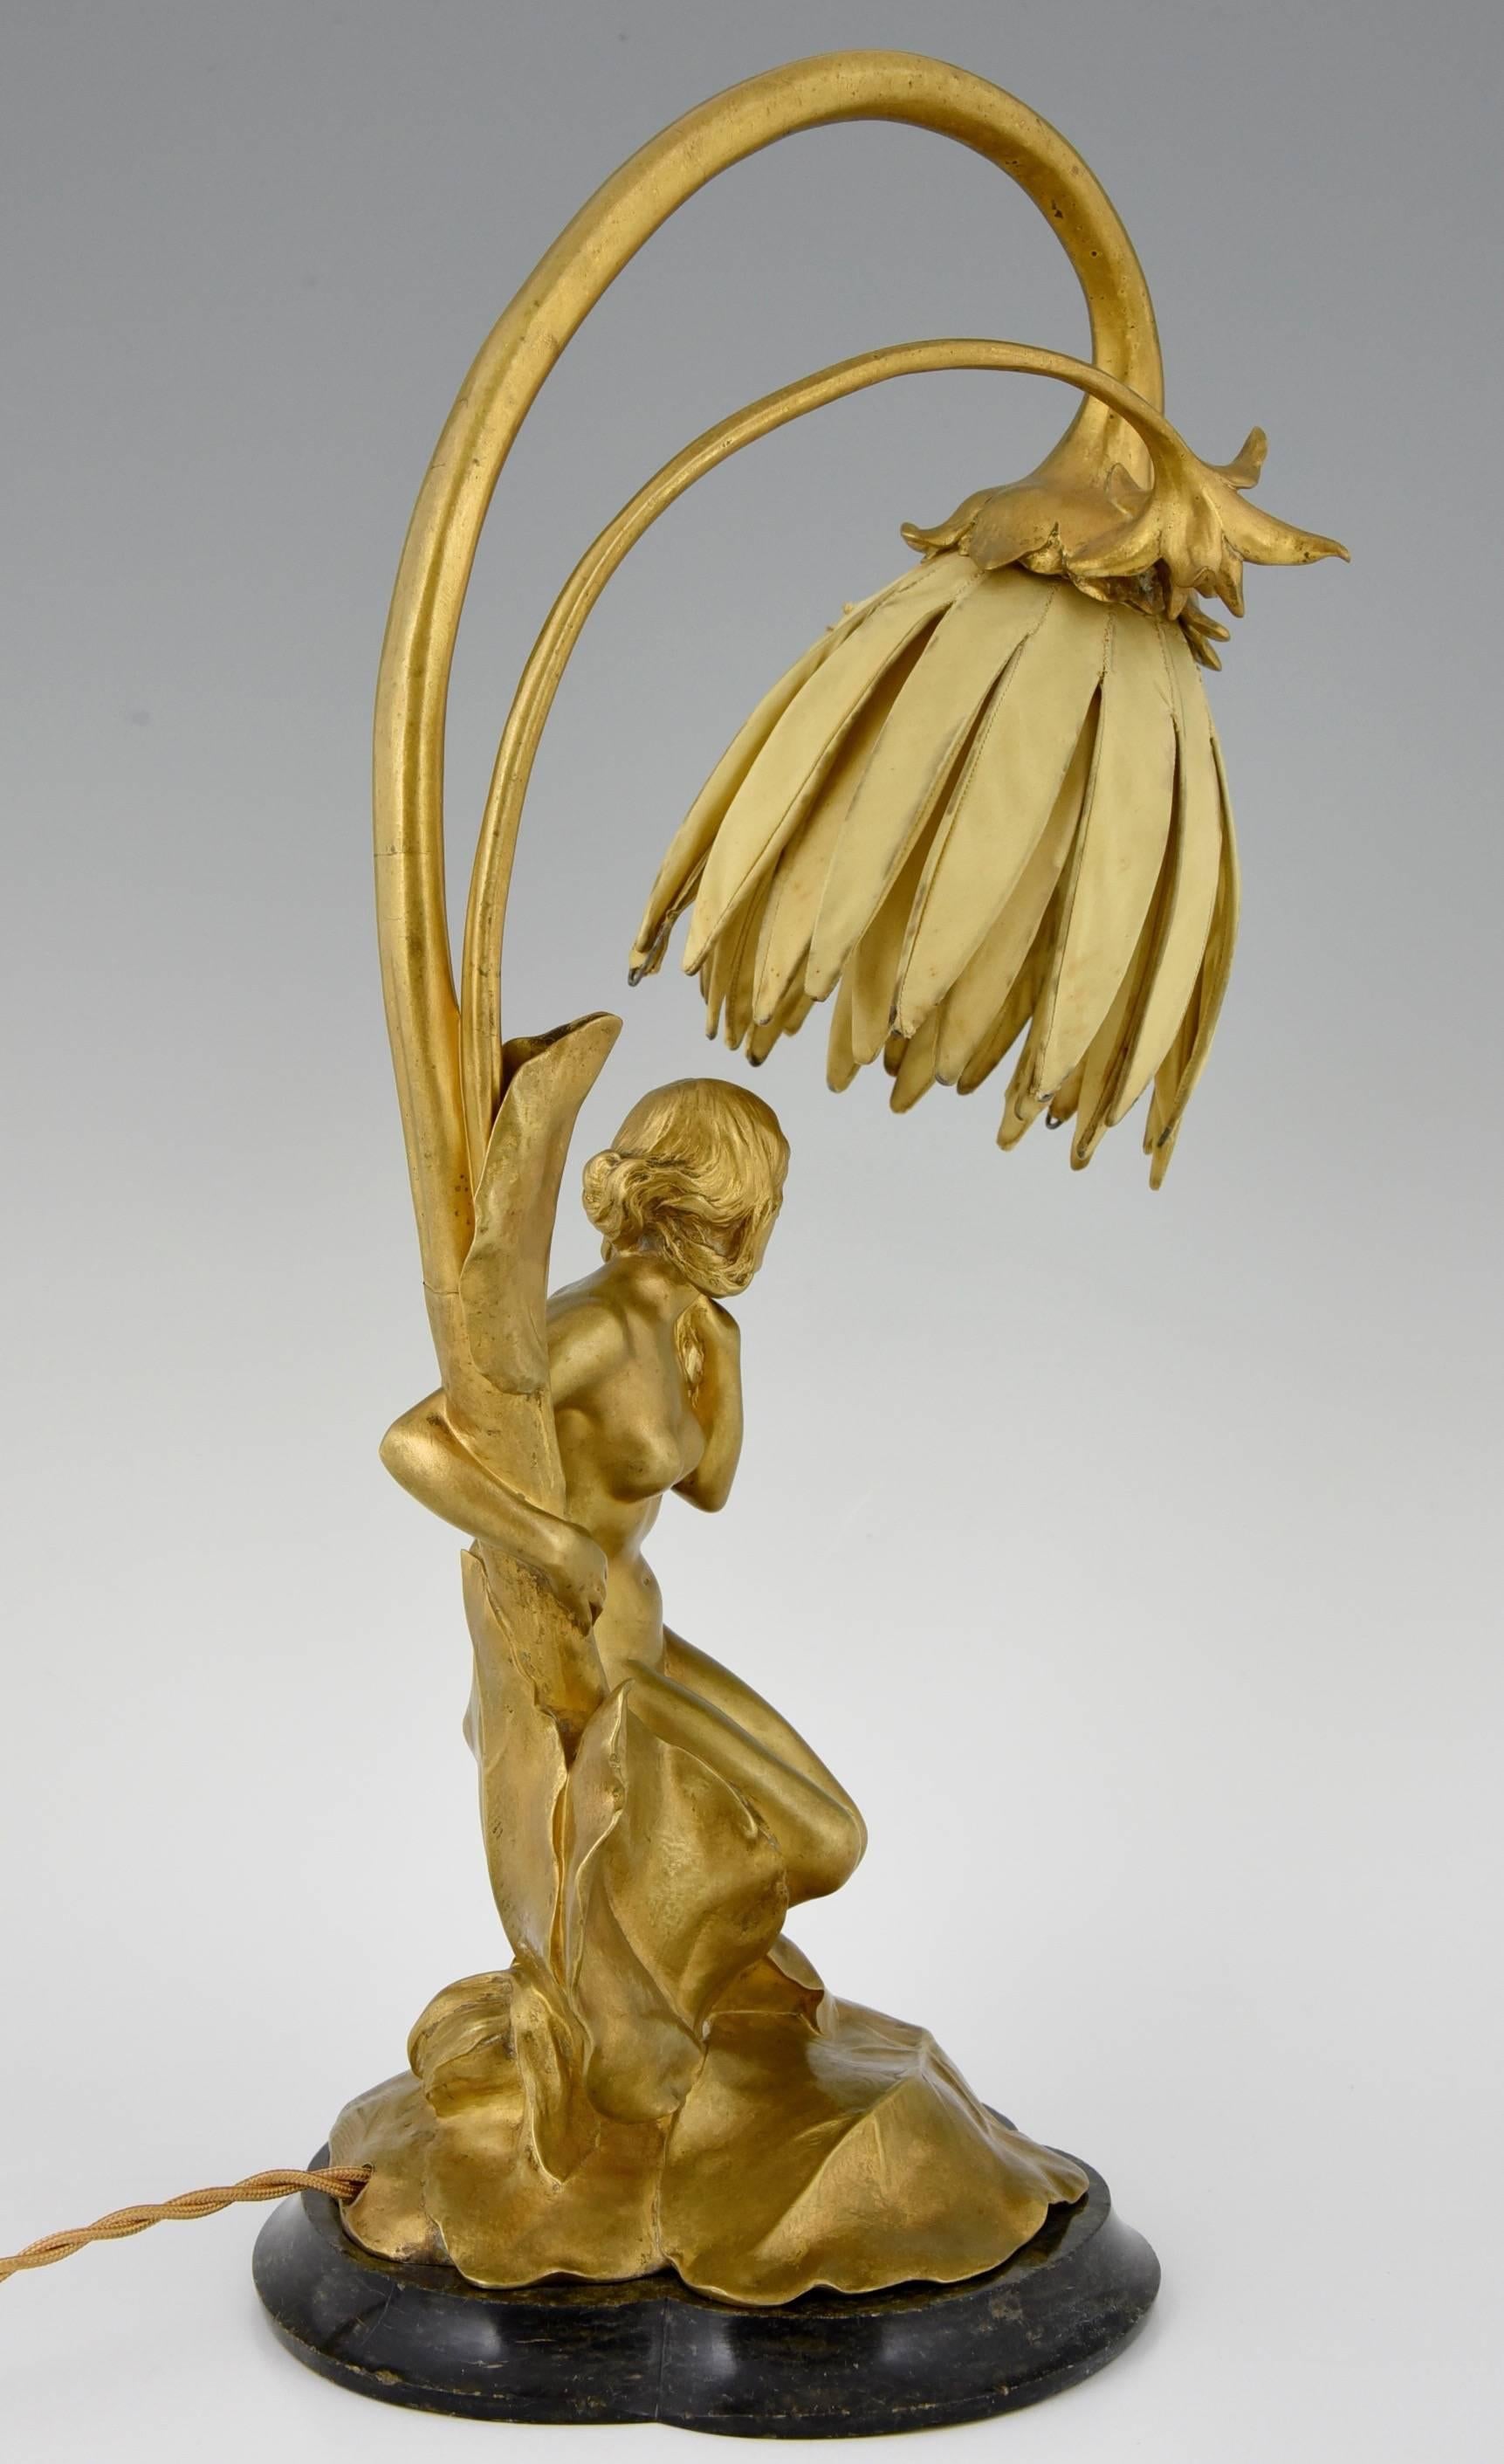 20th Century Art Nouveau Gilt Bronze Lamp with Nude by Maurice Bouval, Colin Foundry 1900